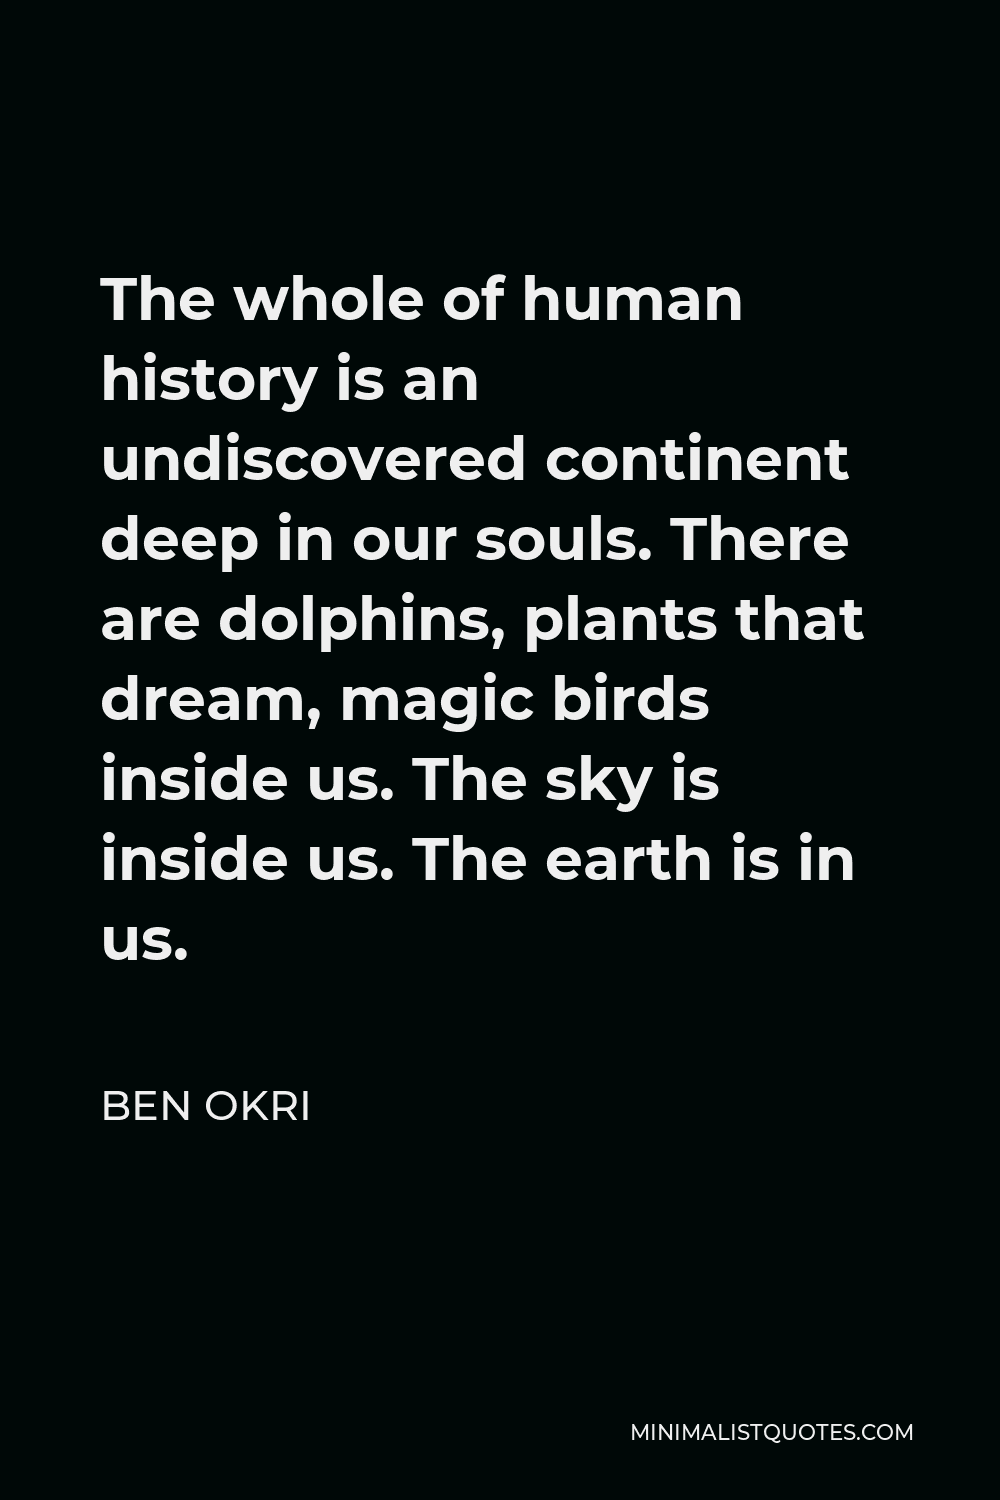 Ben Okri Quote - The whole of human history is an undiscovered continent deep in our souls. There are dolphins, plants that dream, magic birds inside us. The sky is inside us. The earth is in us.